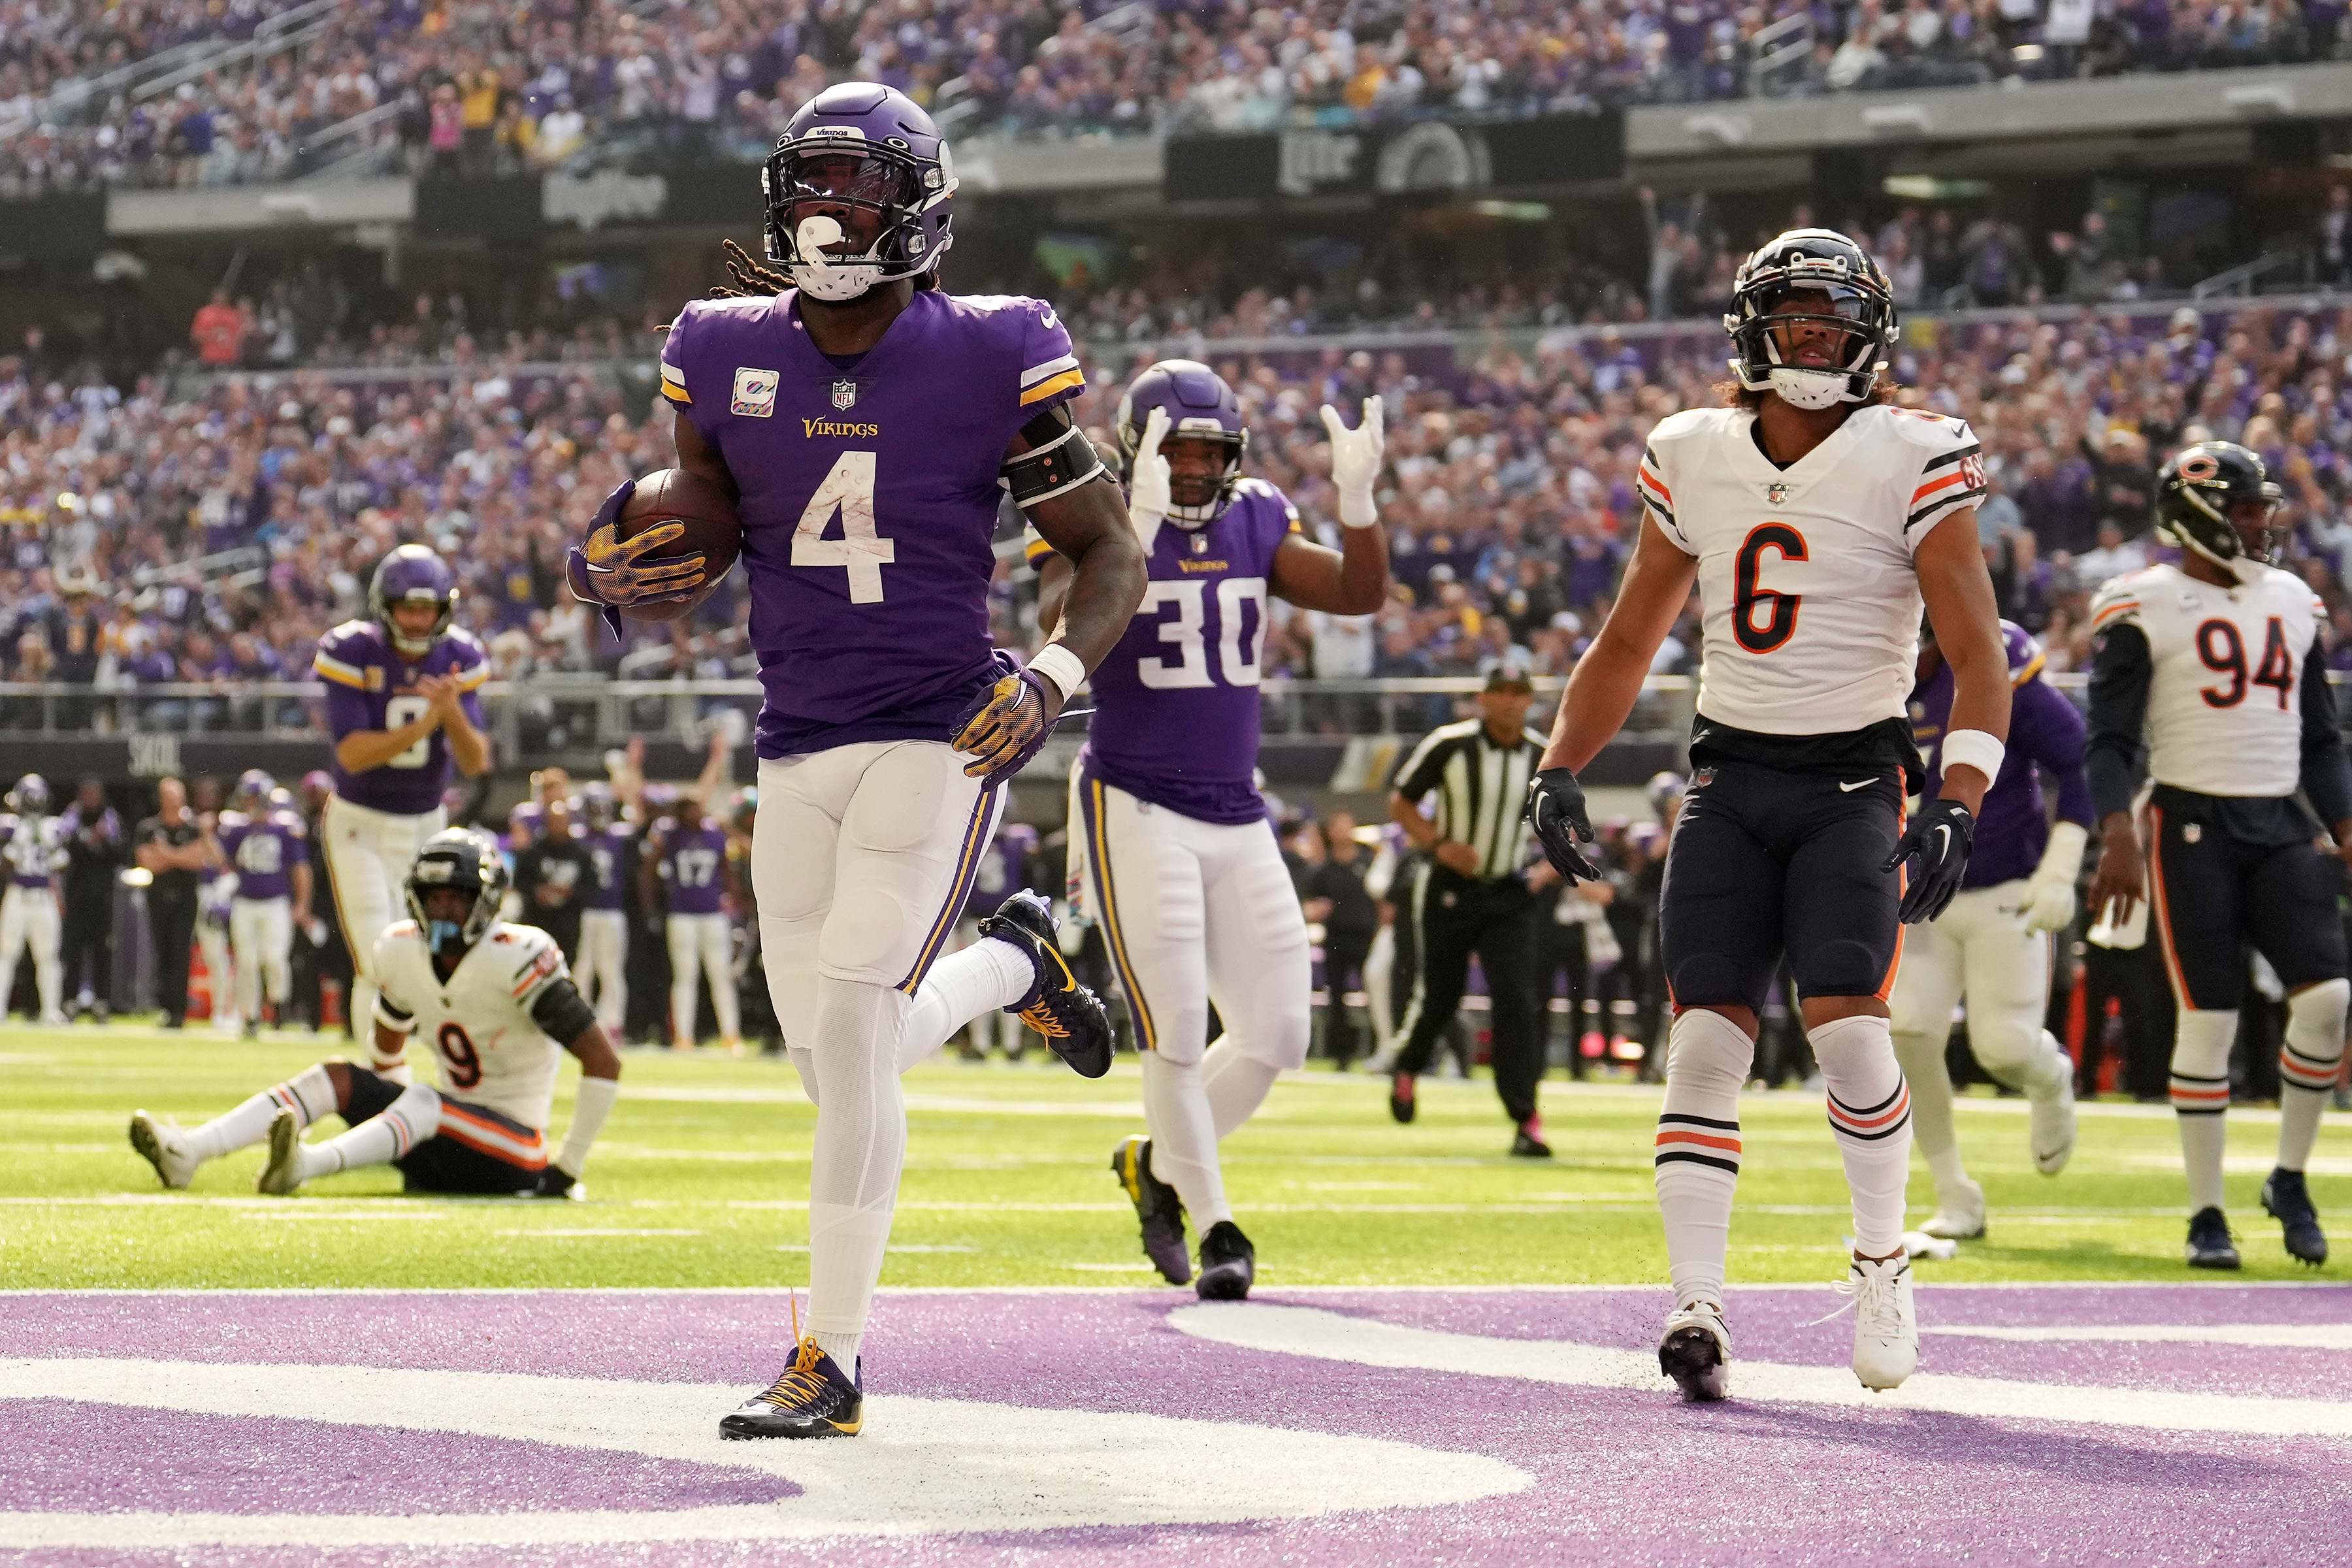 Live: Late touchdown gives Vikings 29-22 lead on Bears